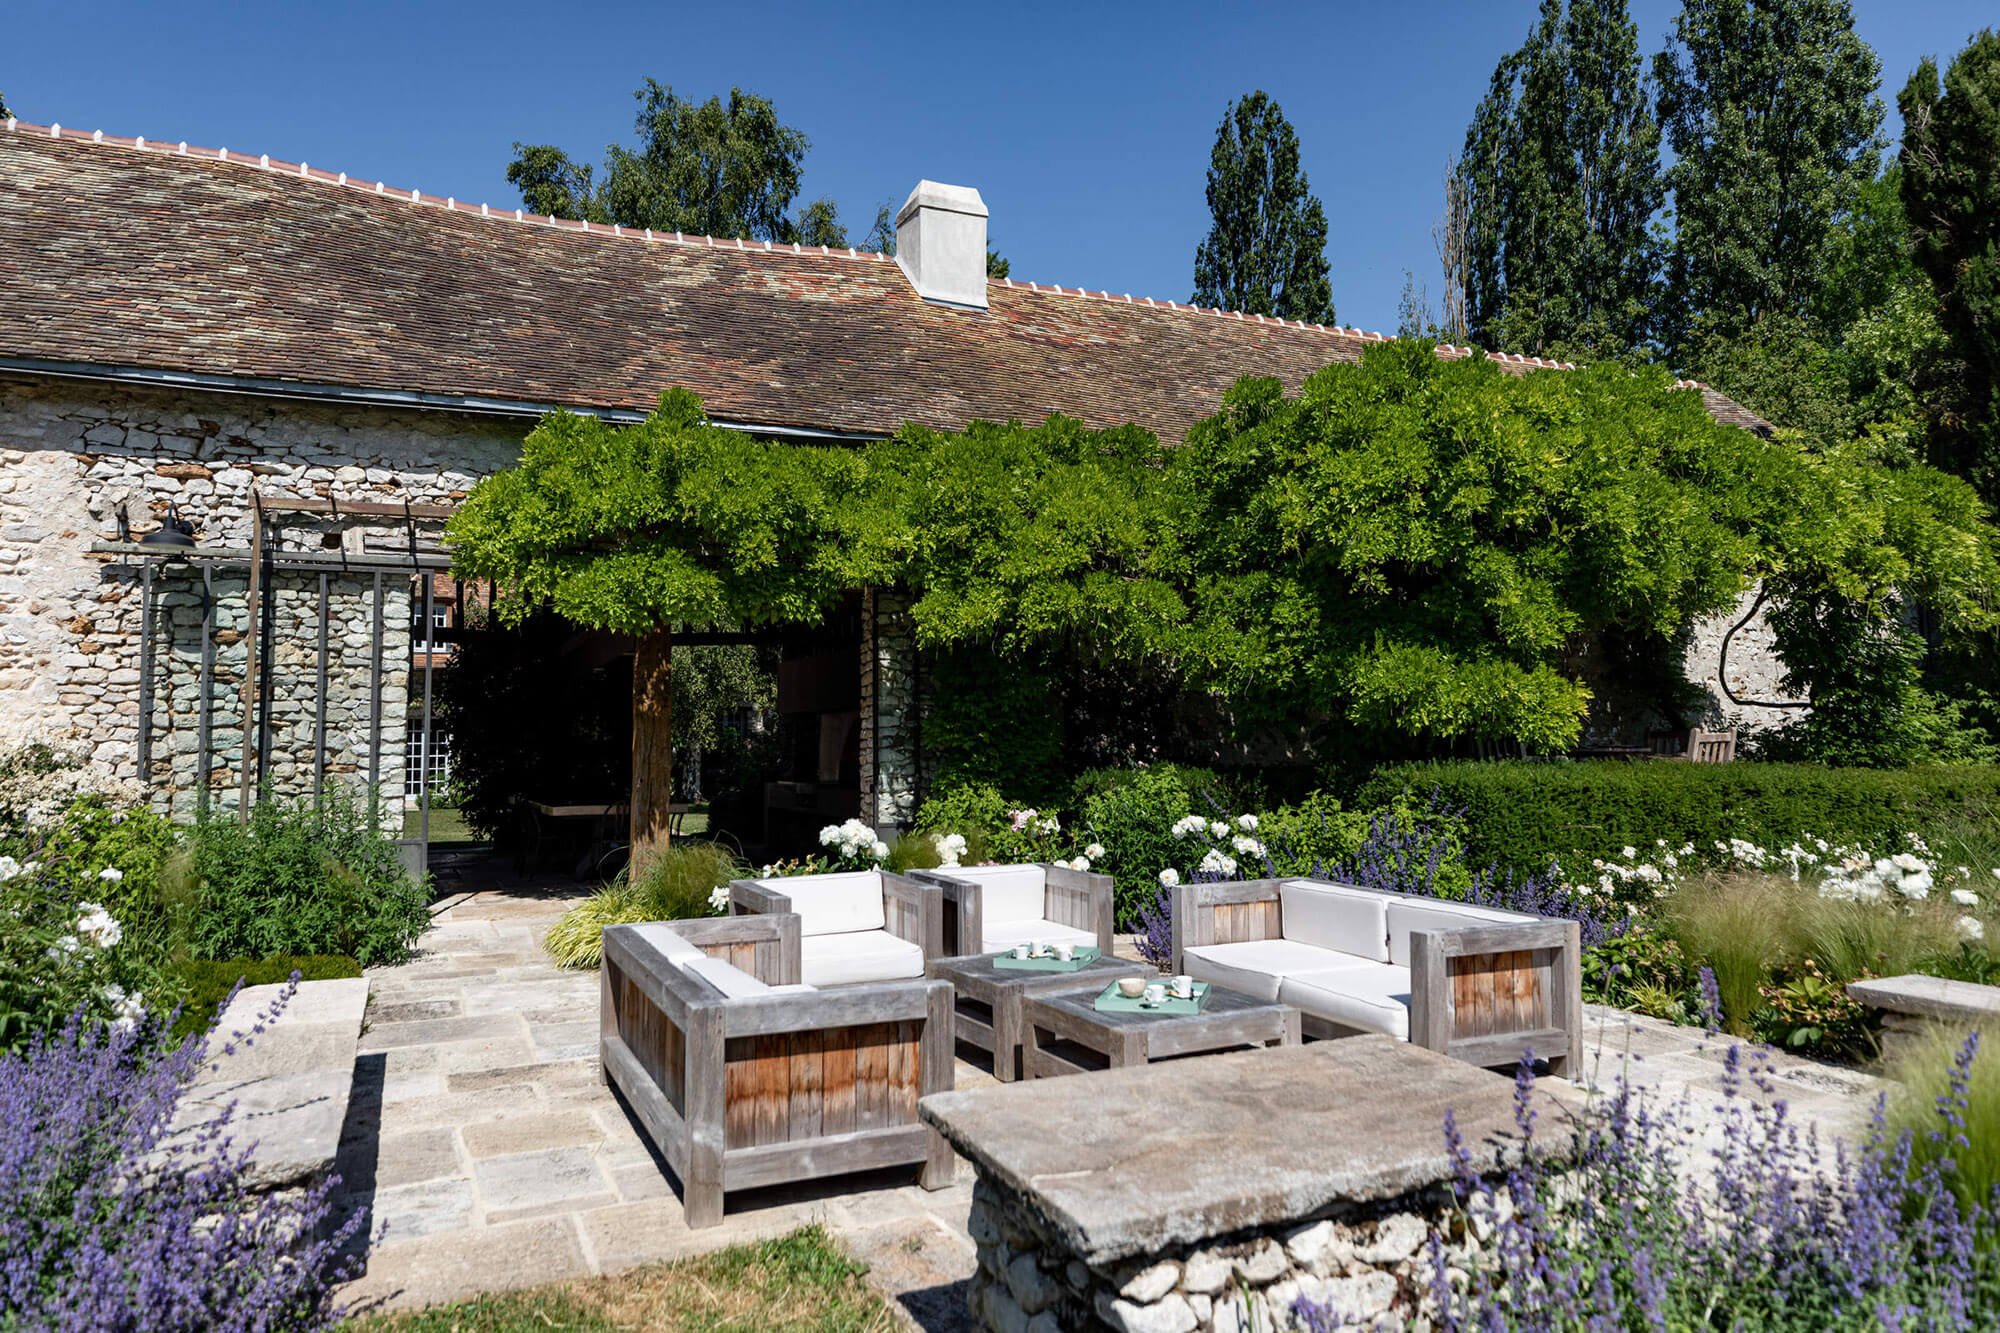 Luxury property near Paris, in the heart of a park and forest in the Ile de France region 